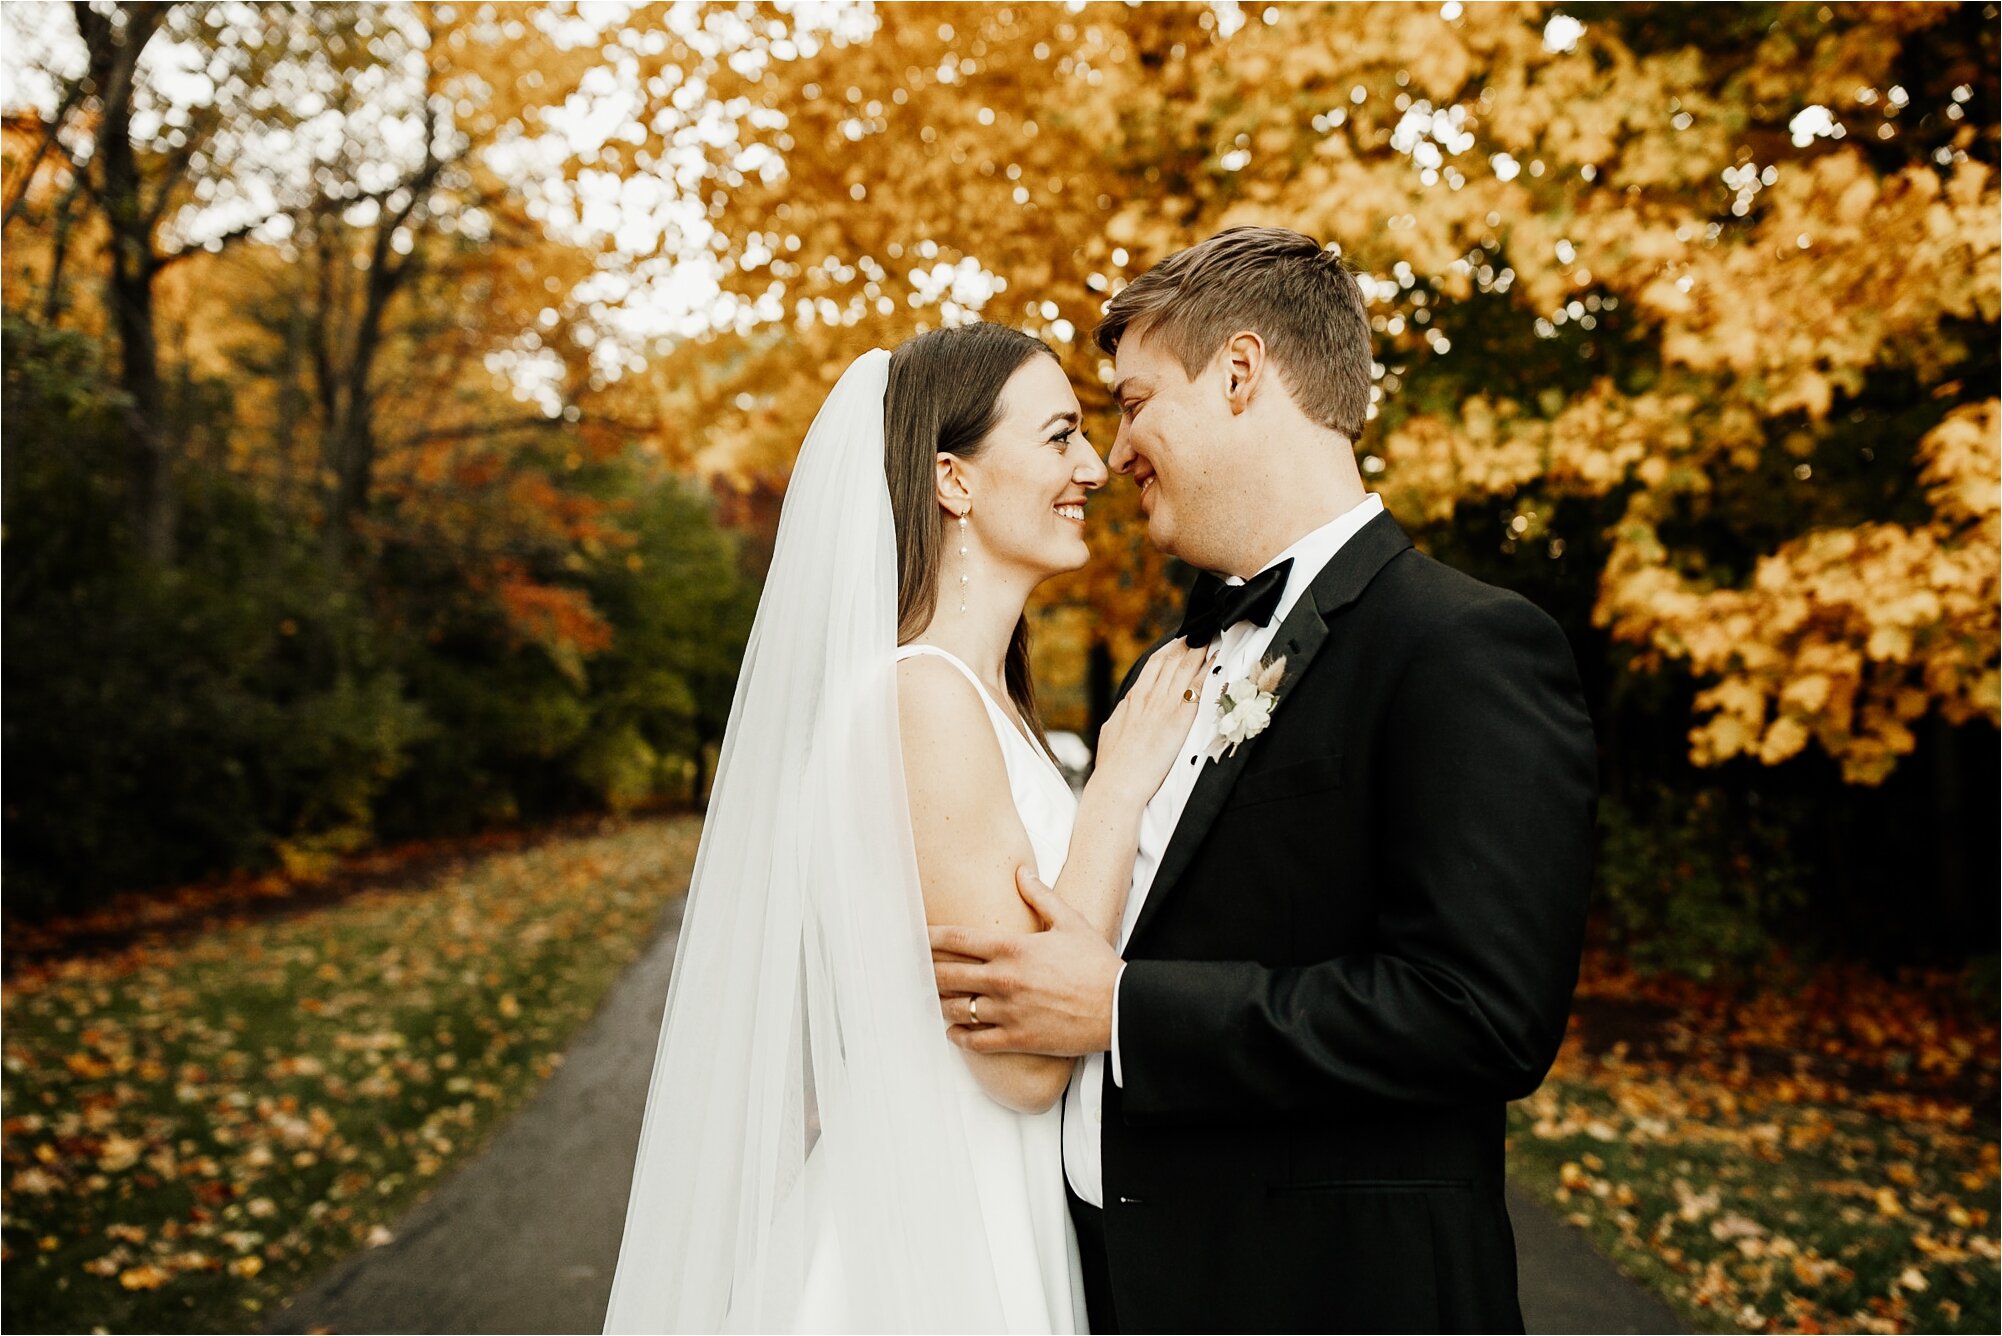  bride and groom fall colors wedding day foliage in wisconsin wedding mequon autumn couple happy love candid photos 